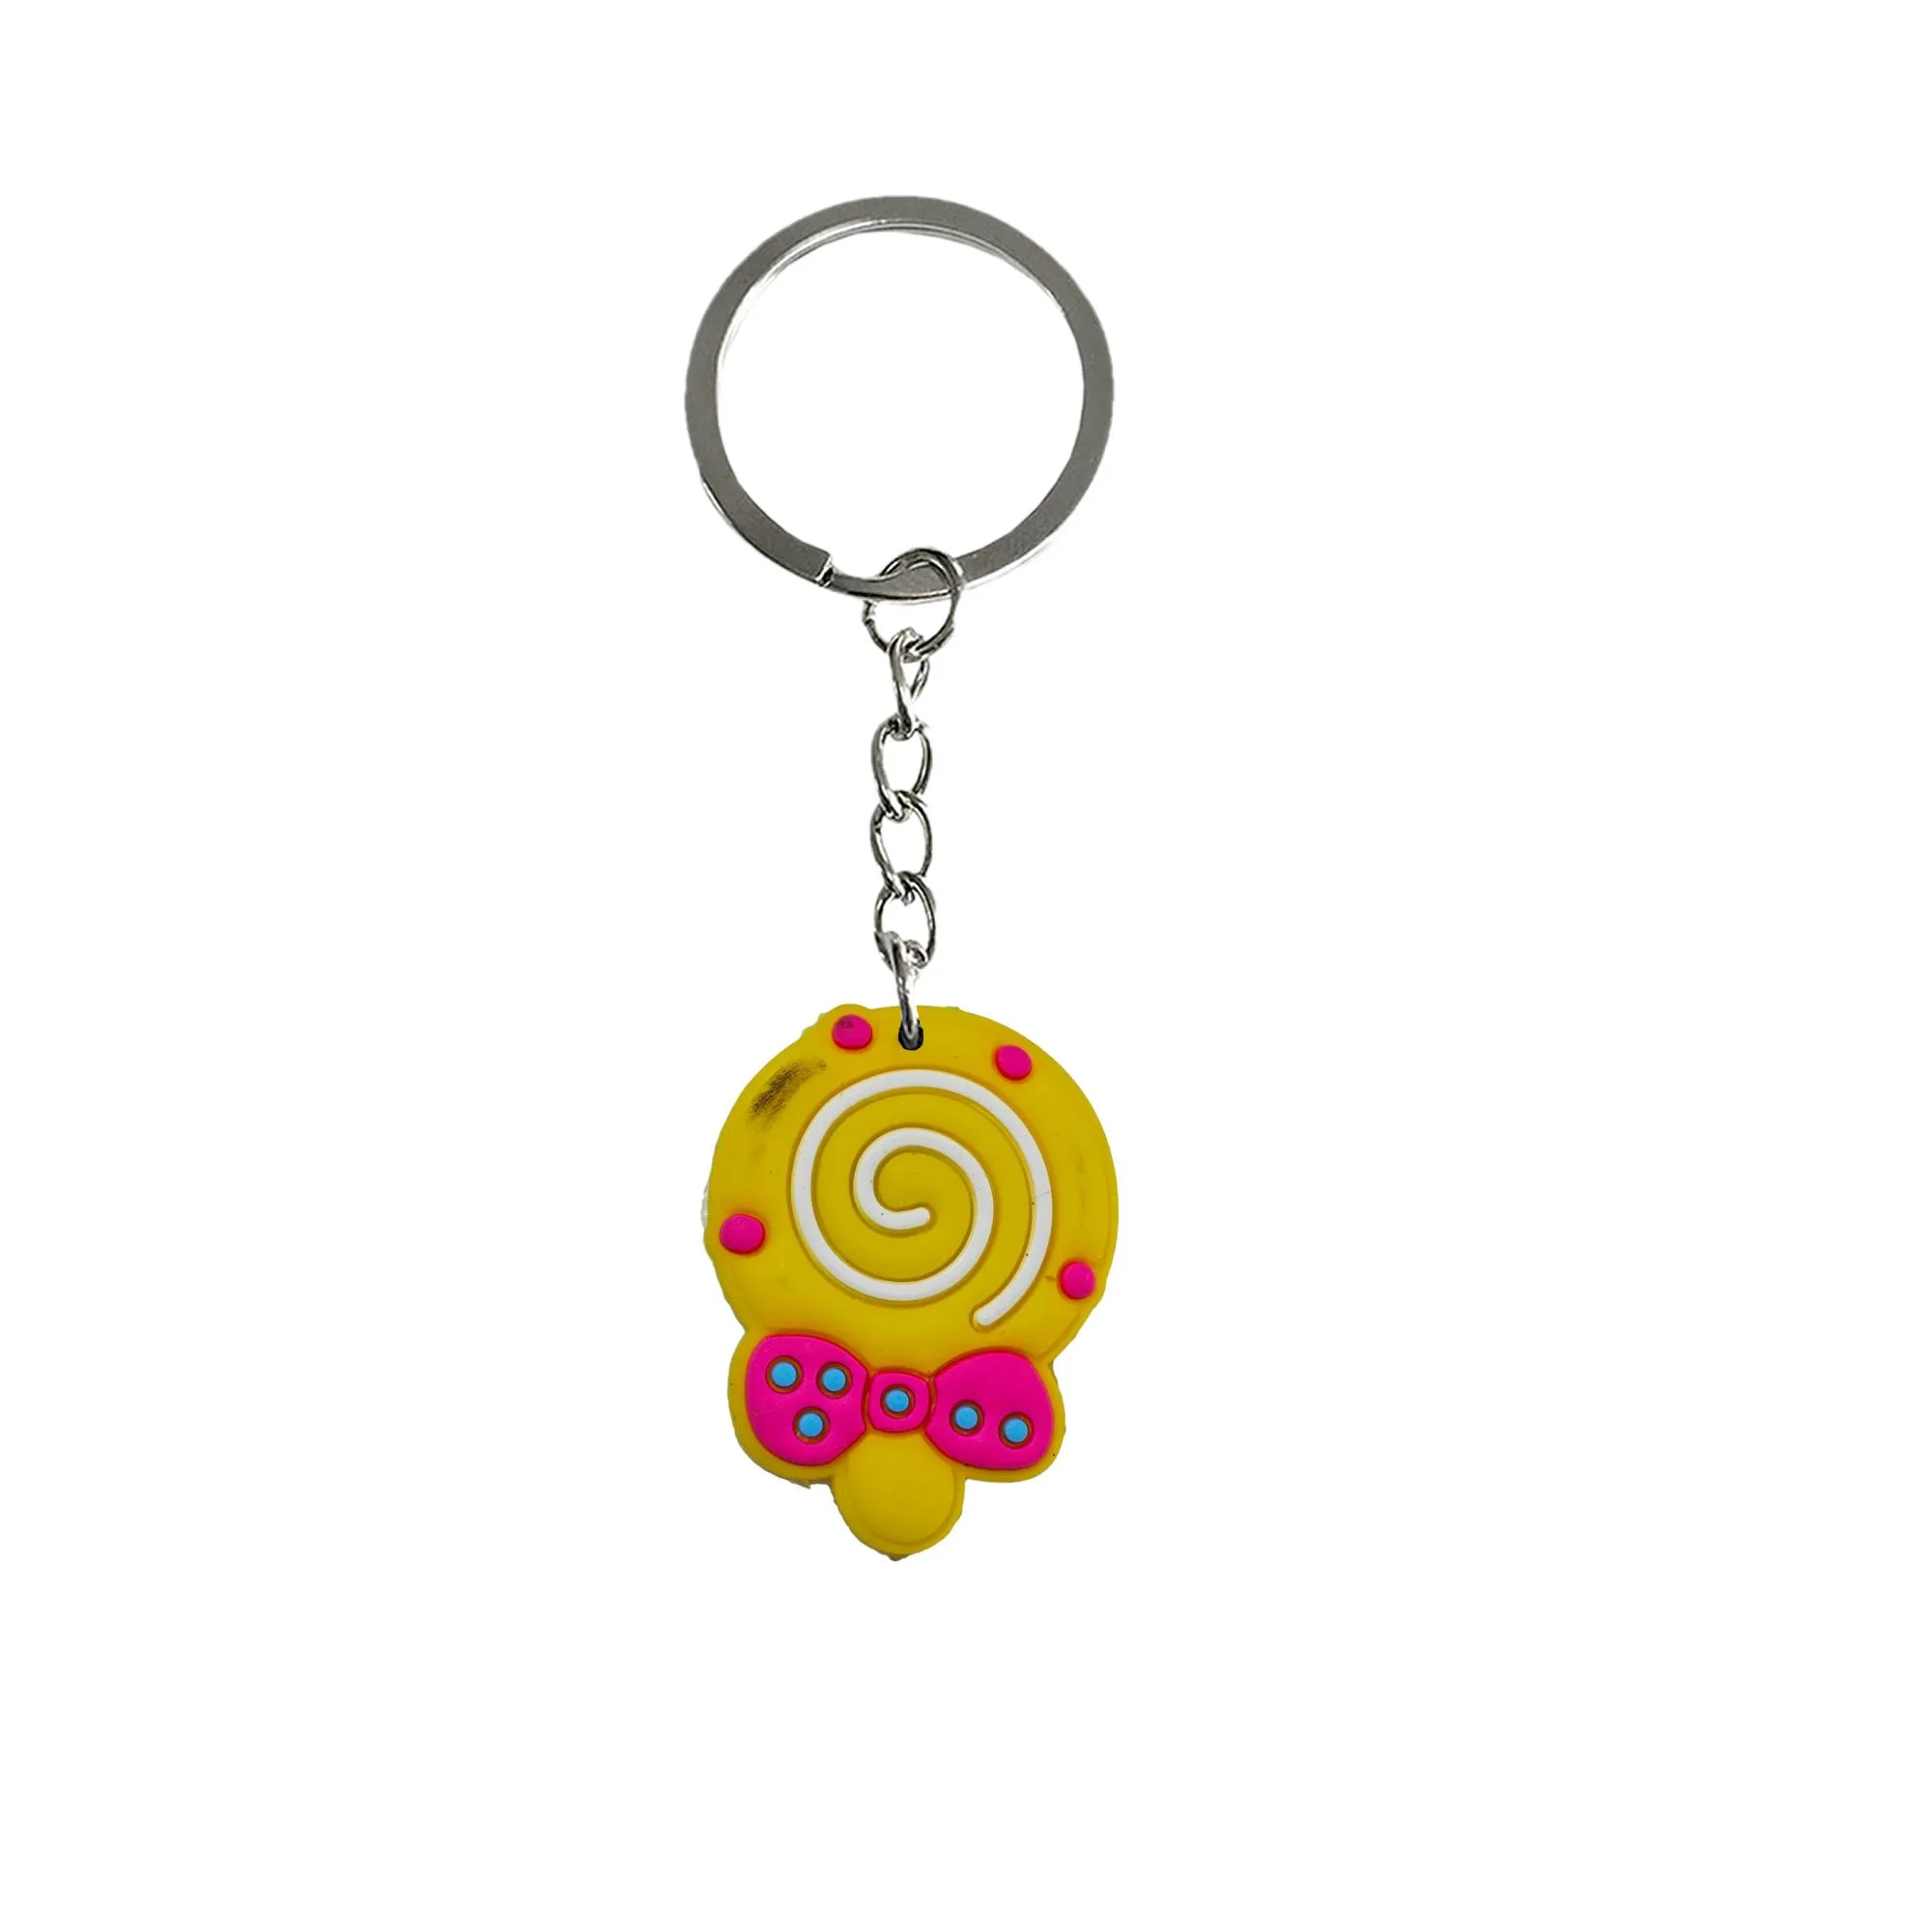 lollipop keychain for tags goodie bag stuffer christmas gifts keychains girls and holiday charms keyring suitable schoolbag boys pendants accessories kids birthday party favors key purse handbag women